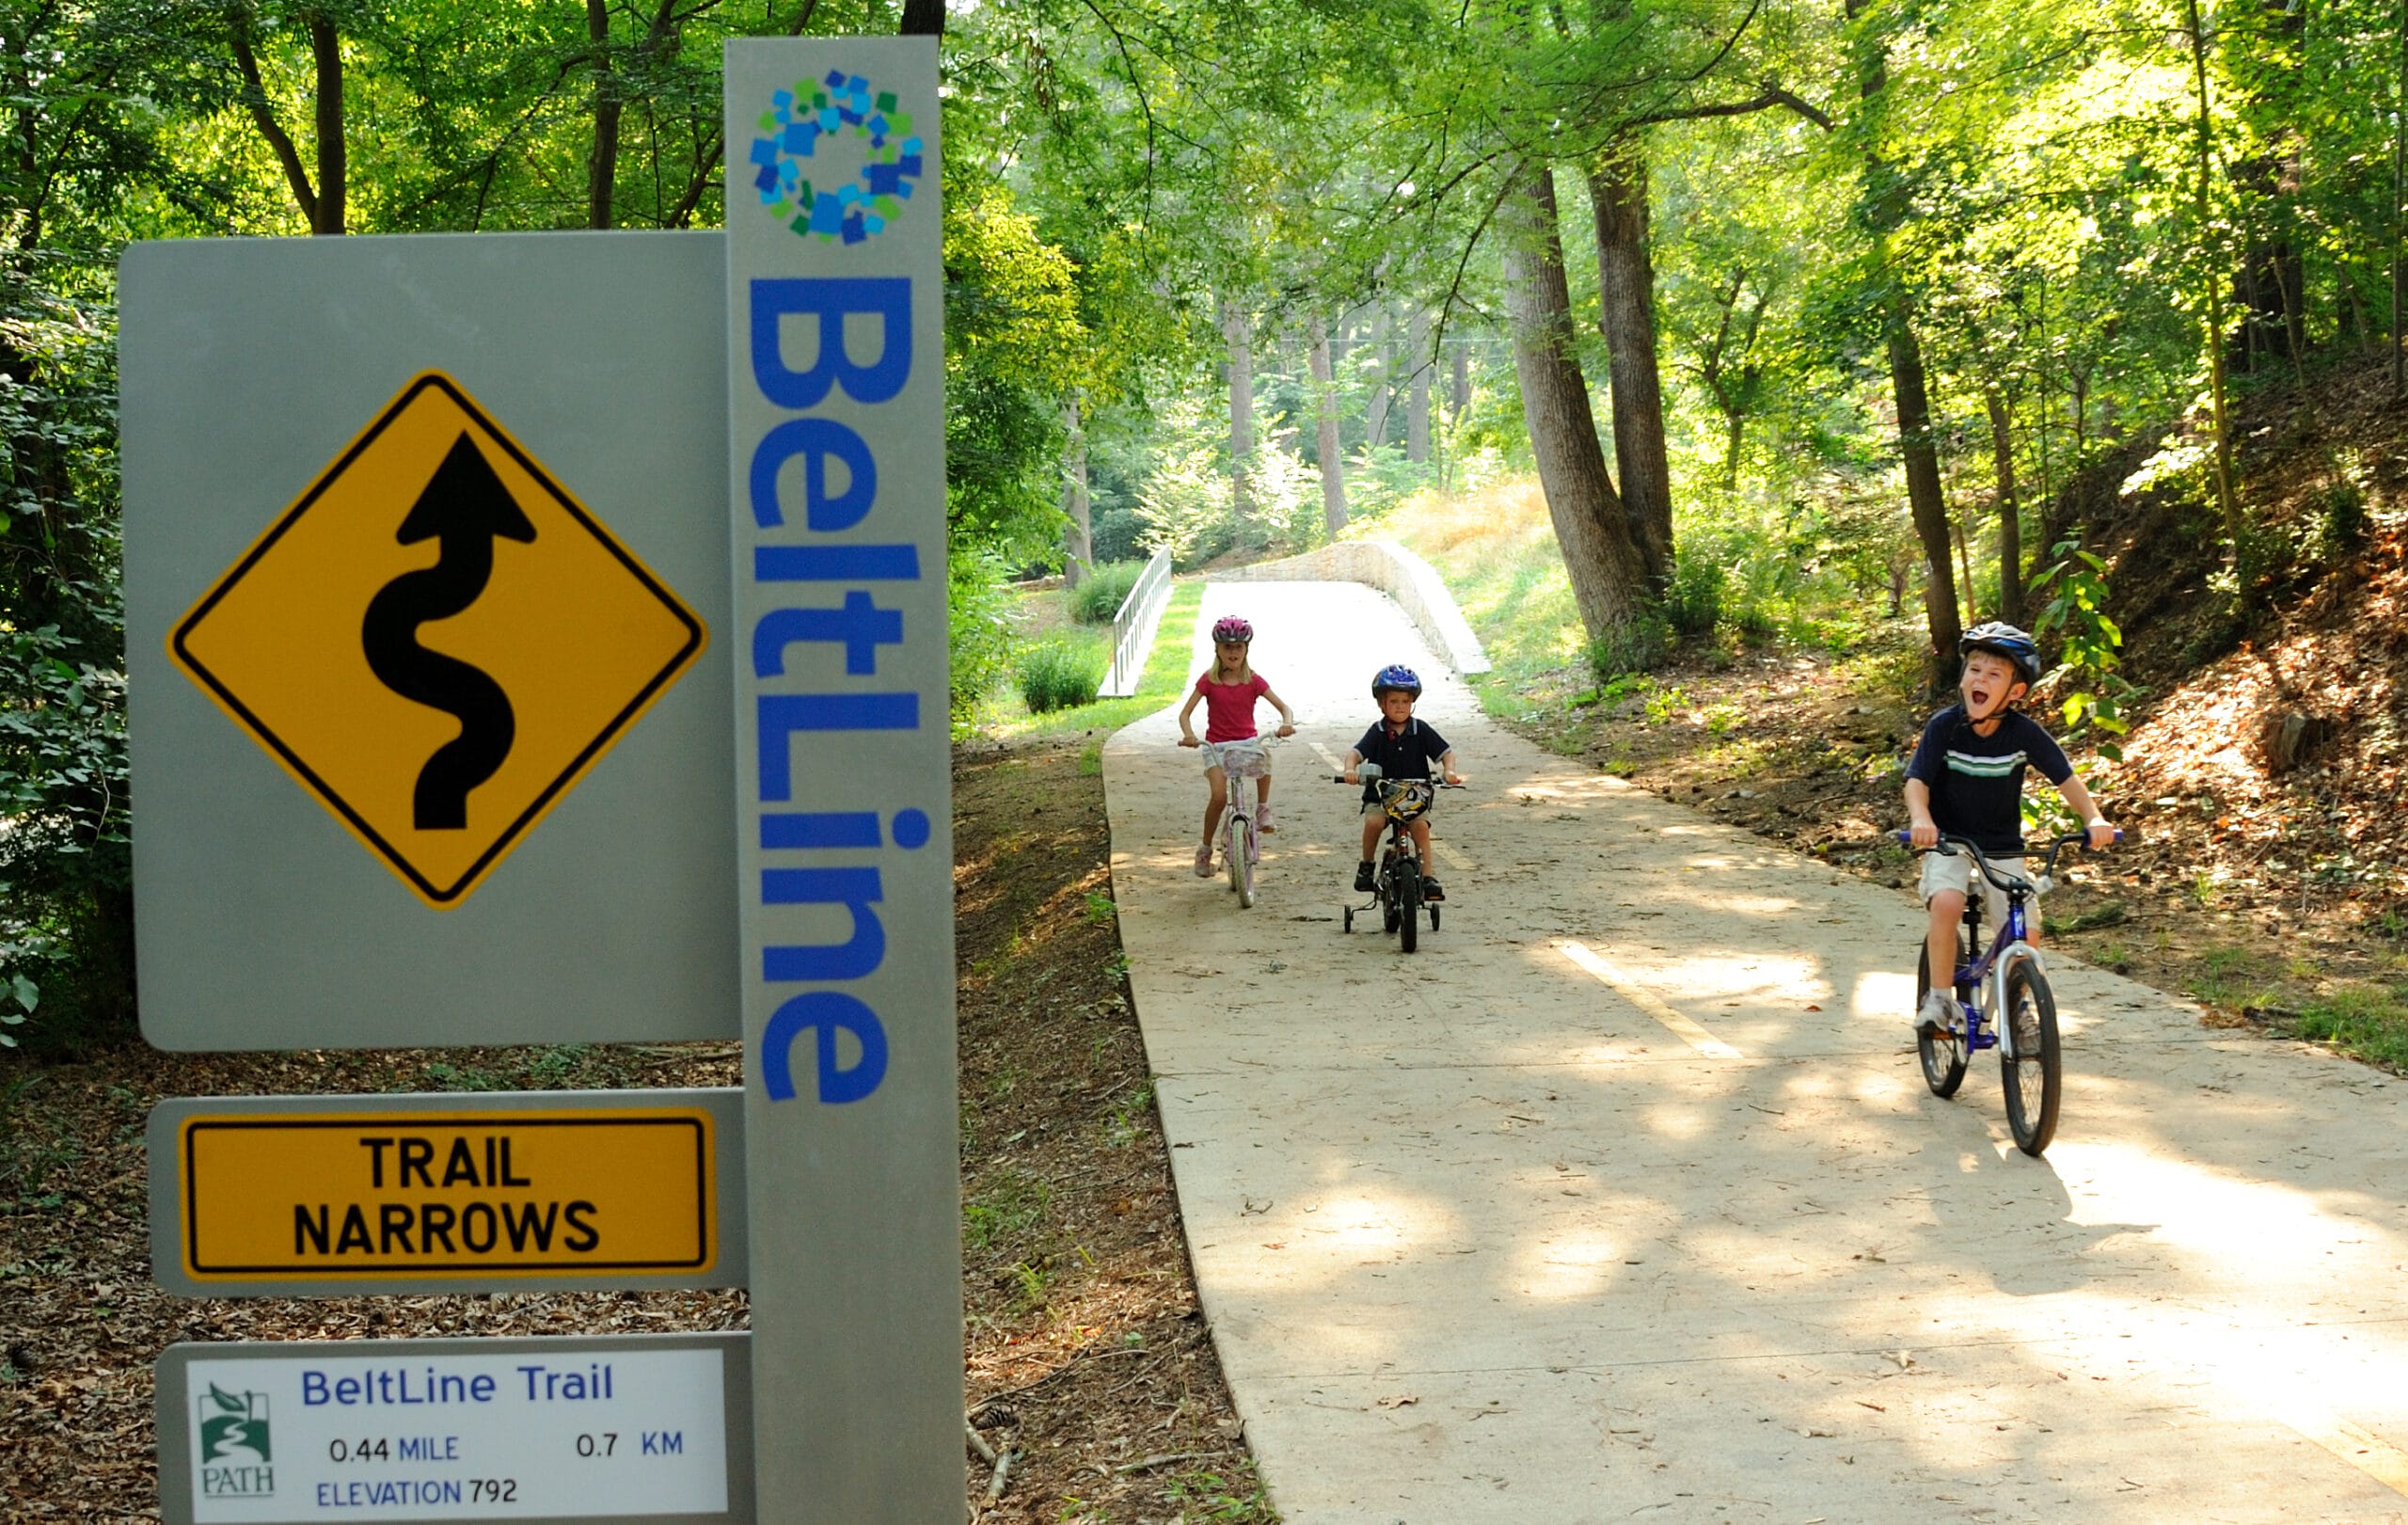 A group of people riding bikes on a trail.